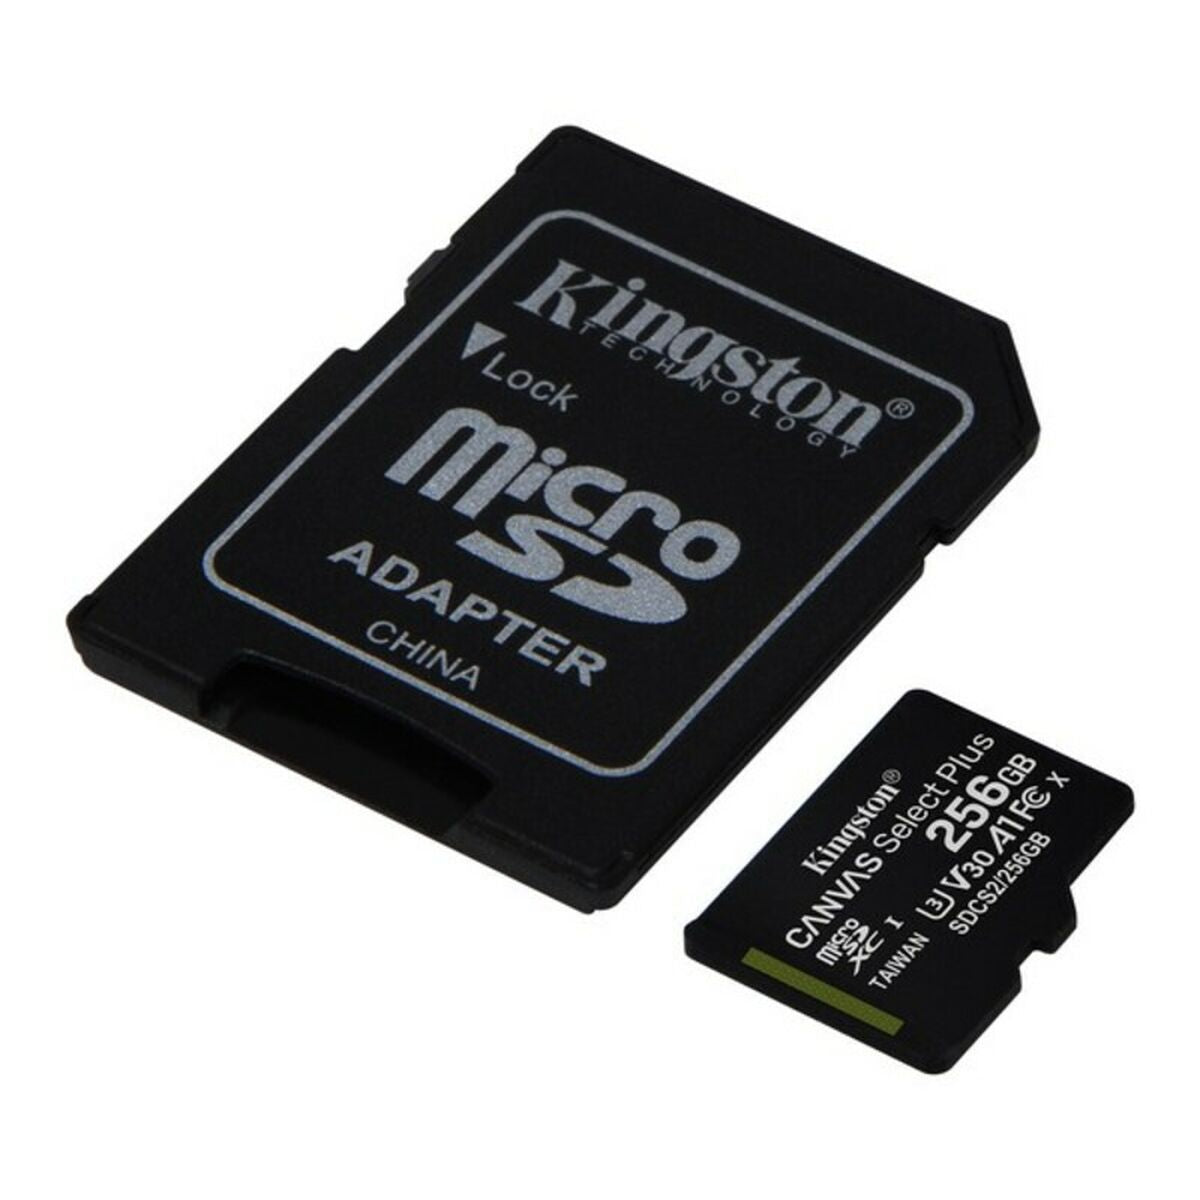 Micro SD Memory Card with Adaptor Kingston SDCS2 100 MB/s